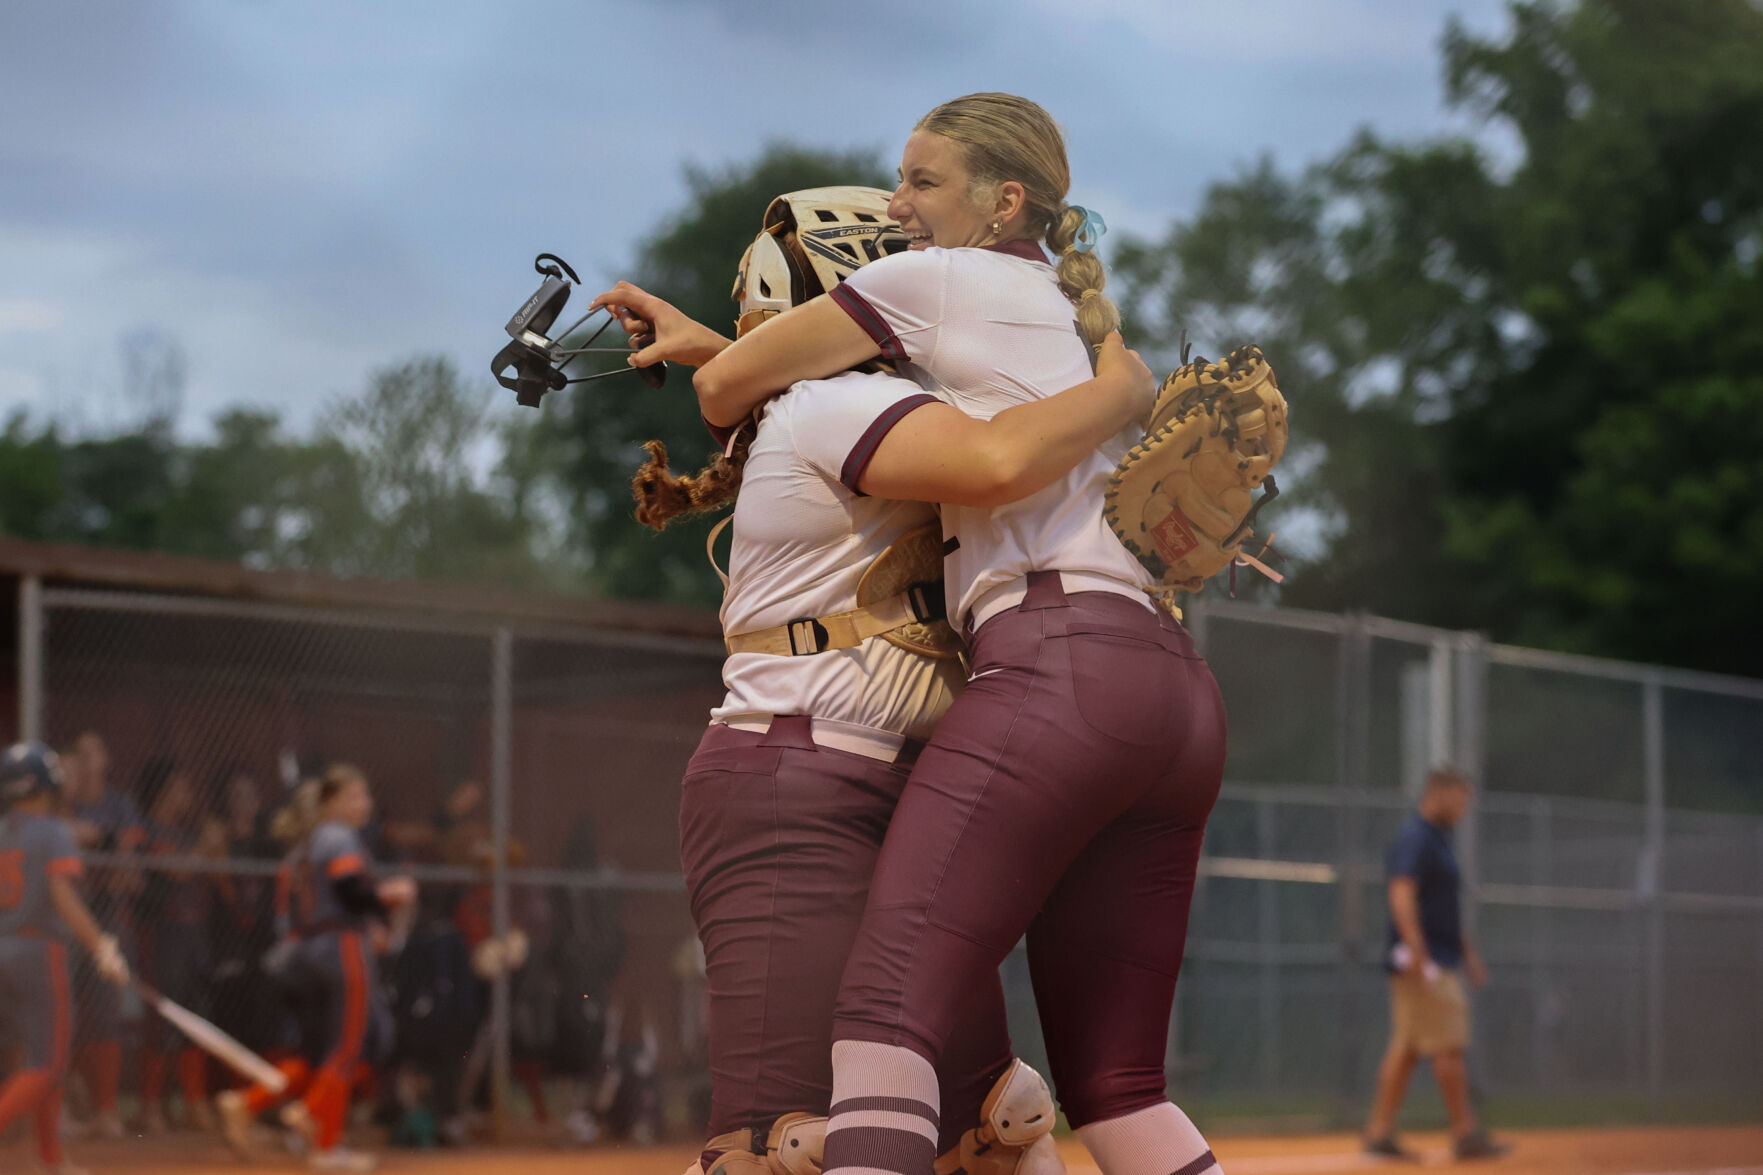 Tennessee High Softball: Dominant Carly Compton Propels Vikings to TSSAA Region Finals